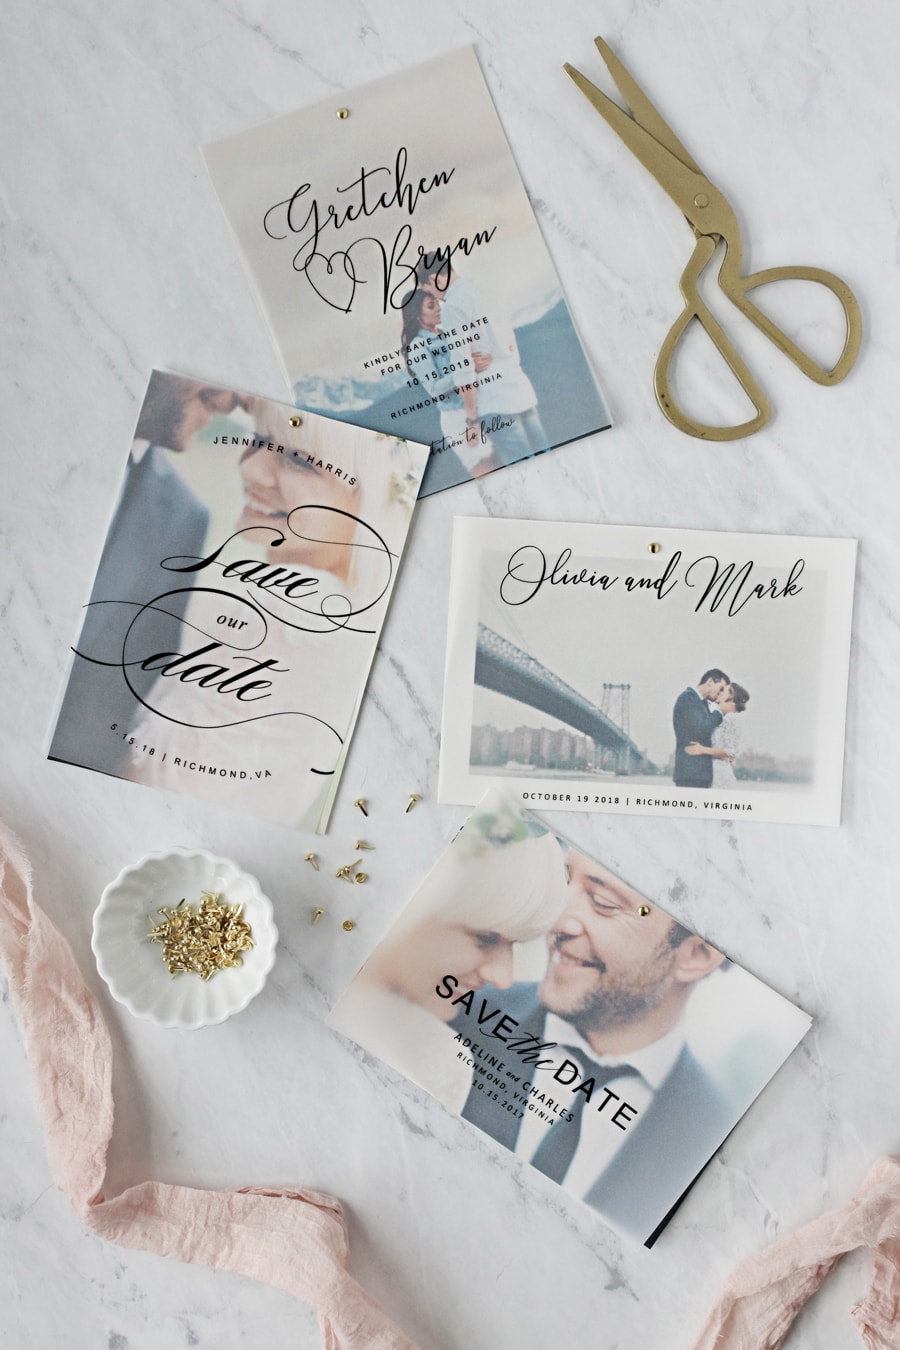 Use one of our free save the date templates to make your own vellum save the dates. Not only are they quick and easy but your guests will love them.